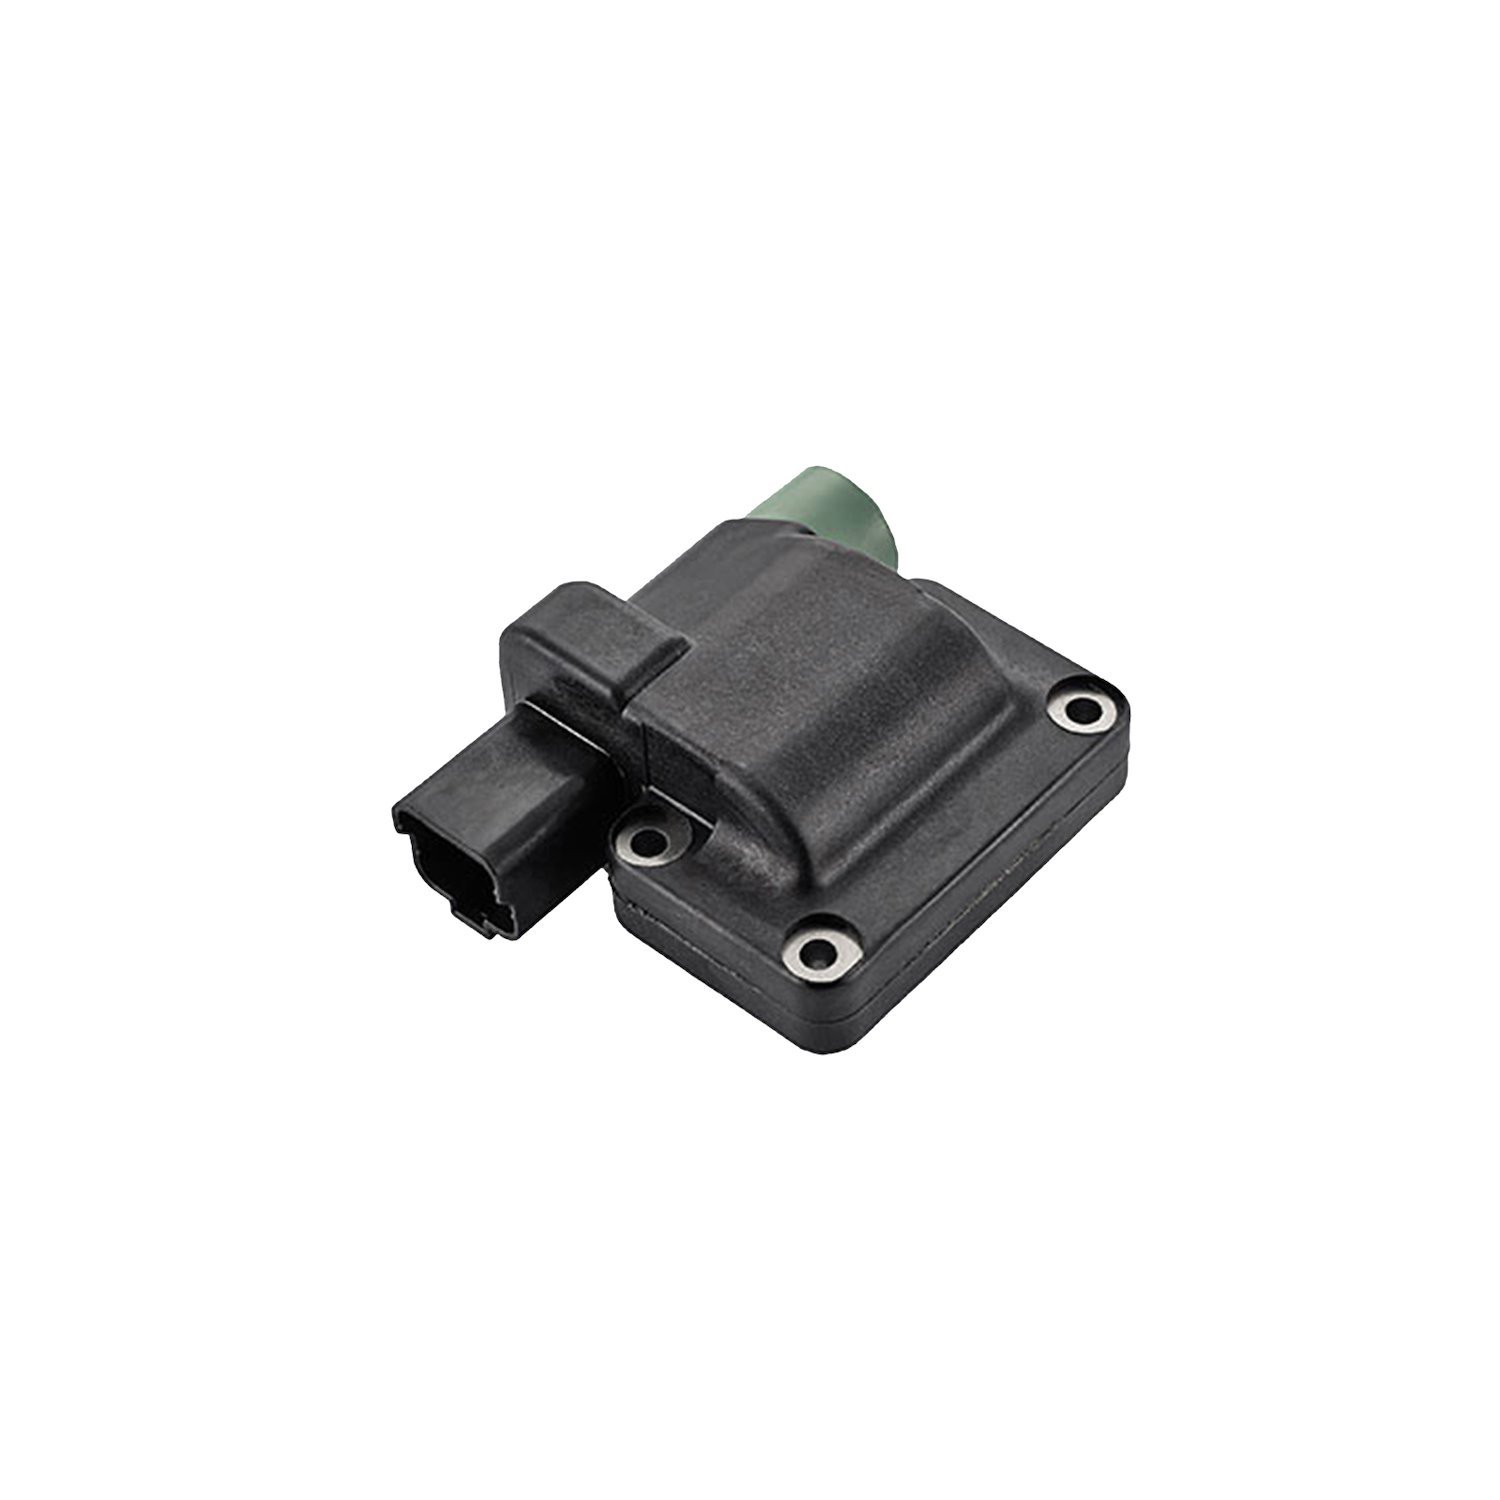 OE Replacement Ignition Coil for Honda Accord Prelude